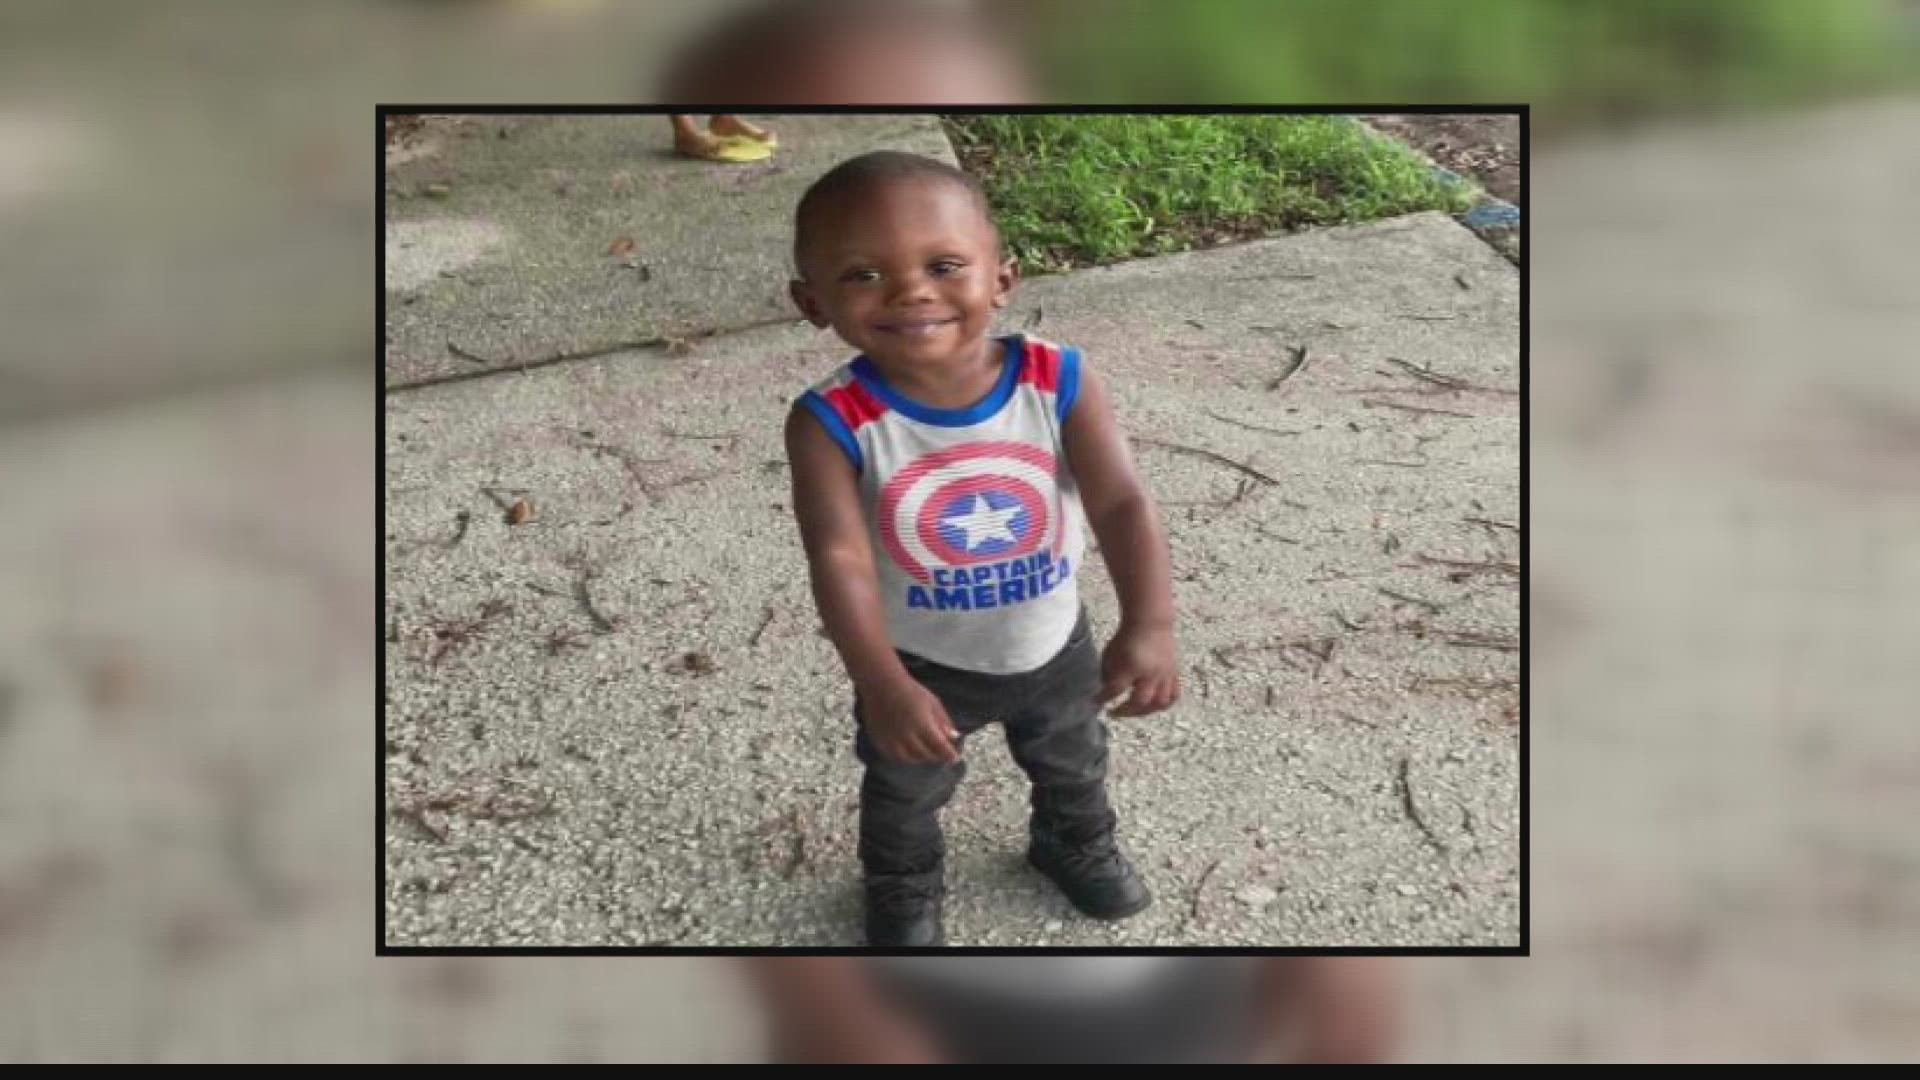 Alysa Jenkins' two-year-old son, Landan, is known for his smiles. However, for the past five days, those smiles have been missing after he was shot.